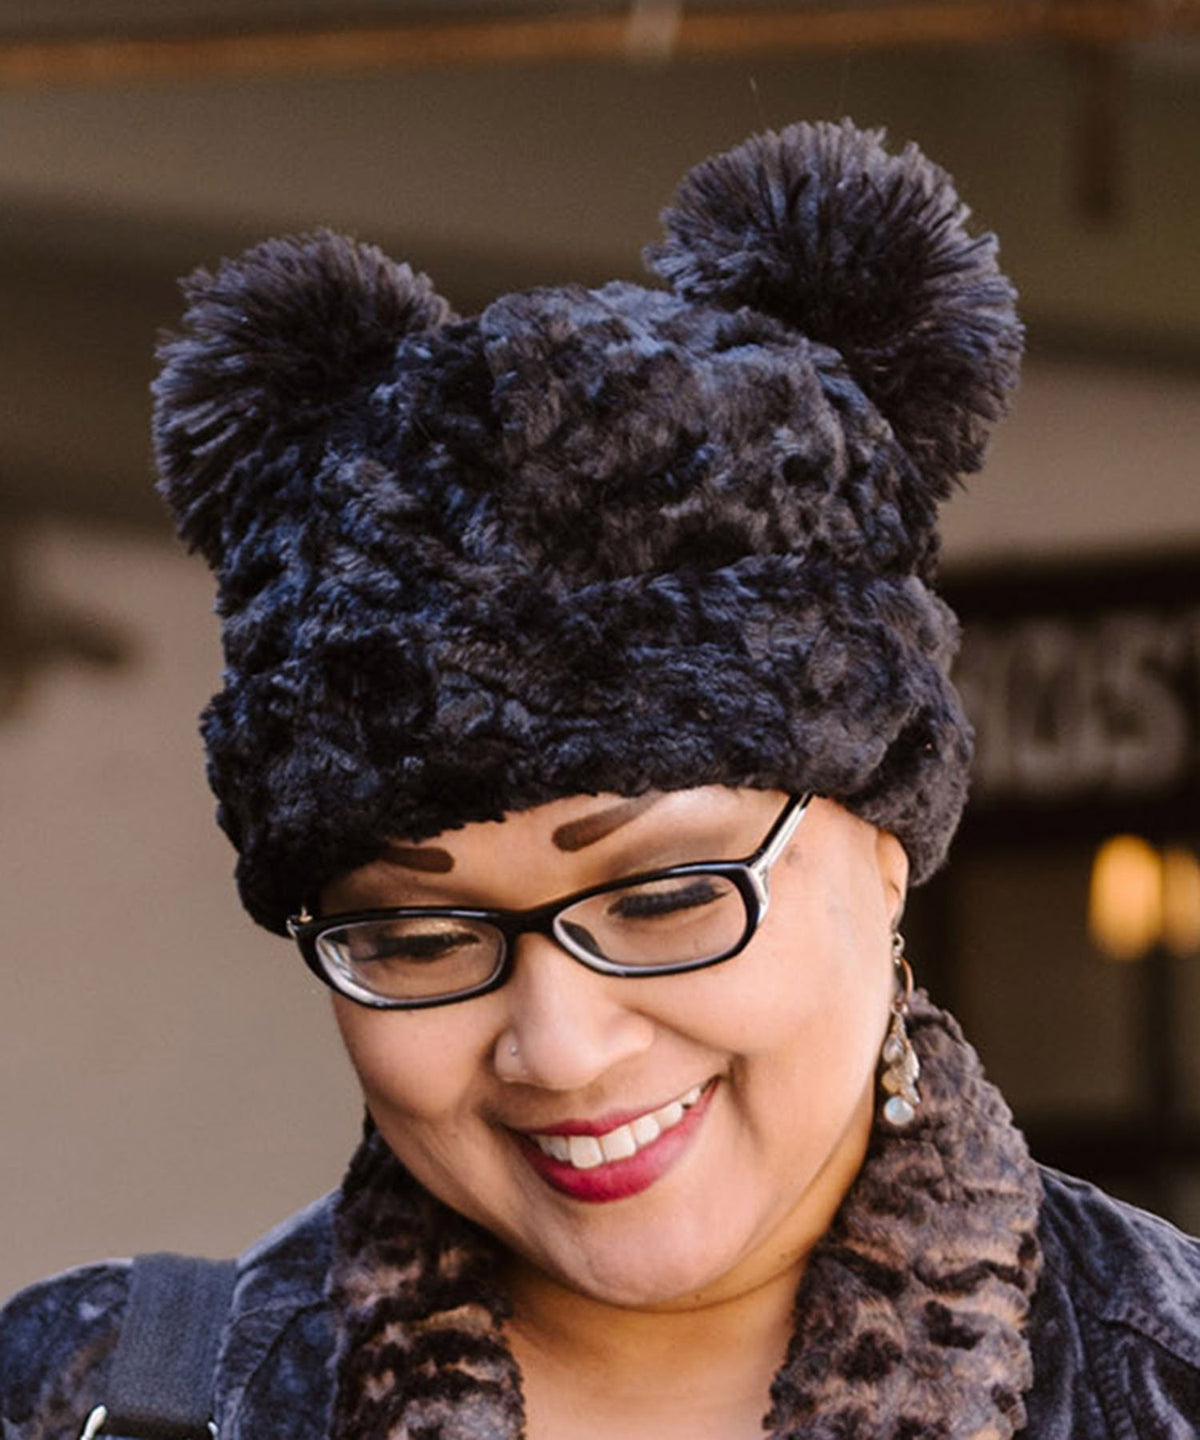 Woman modeling Bear Beanie Hat with ears, in Cuddly Black Faux Fur lined with Chocolate. Handmade by Pandemonium Millinery.